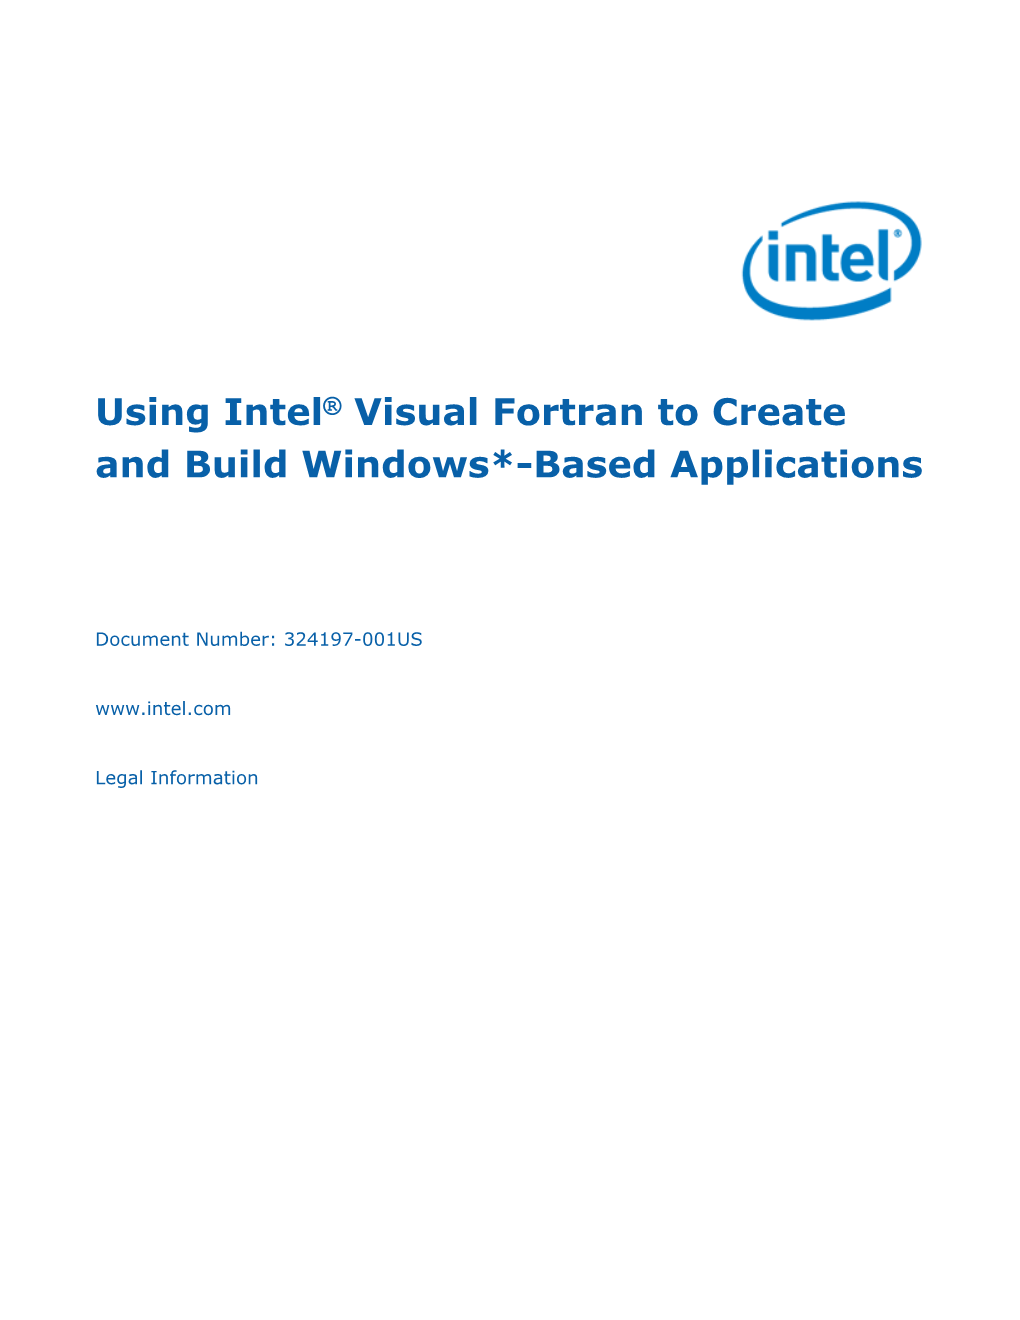 Using Intel® Visual Fortran to Create and Build Windows*-Based Applications